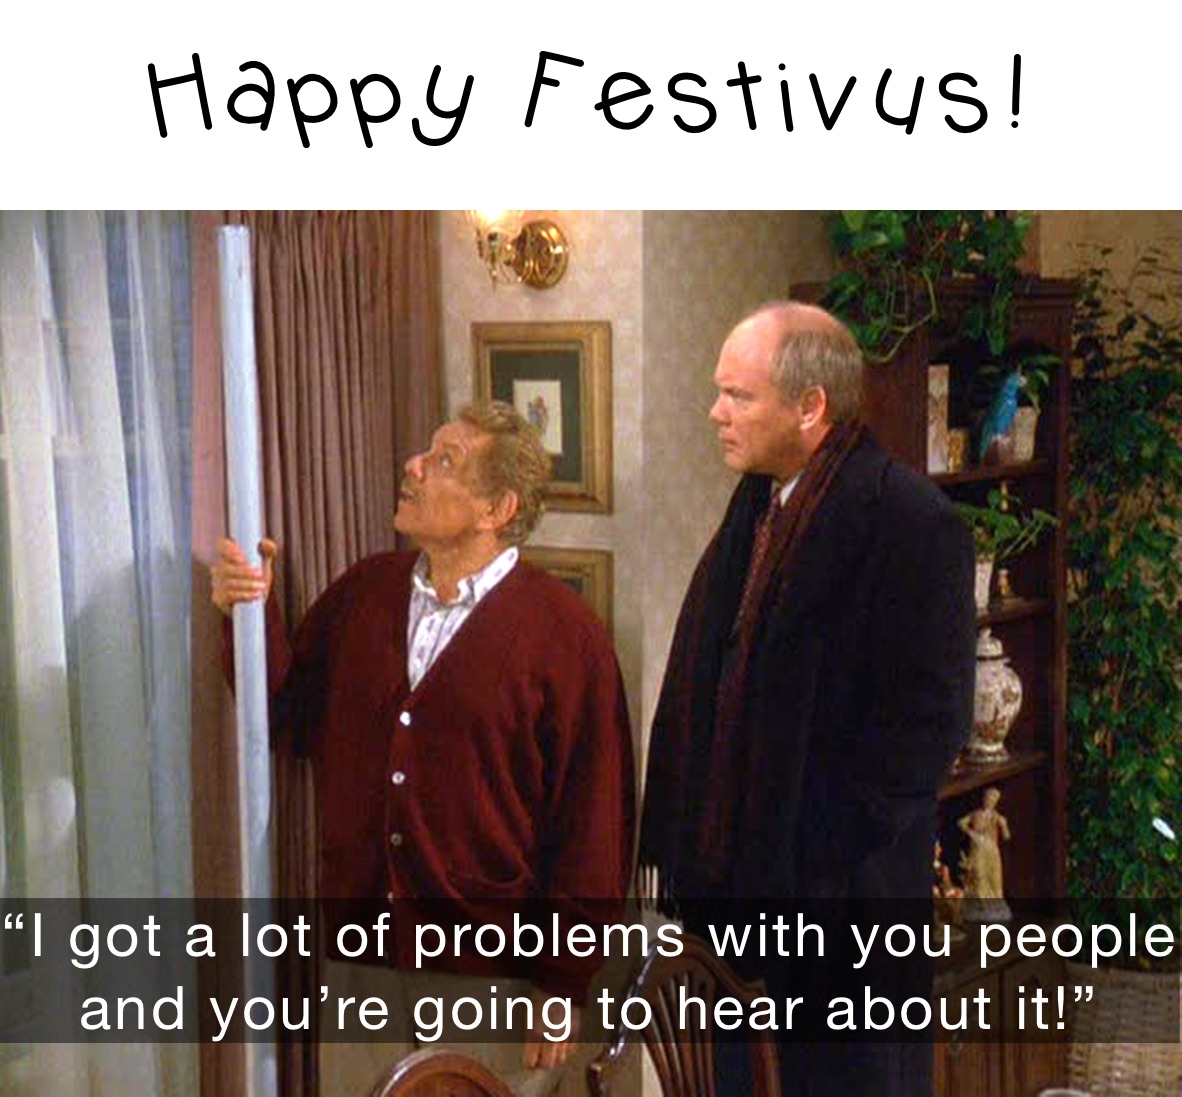 Happy Festivus! “I got a lot of problems with you people and you’re going to hear about it!”